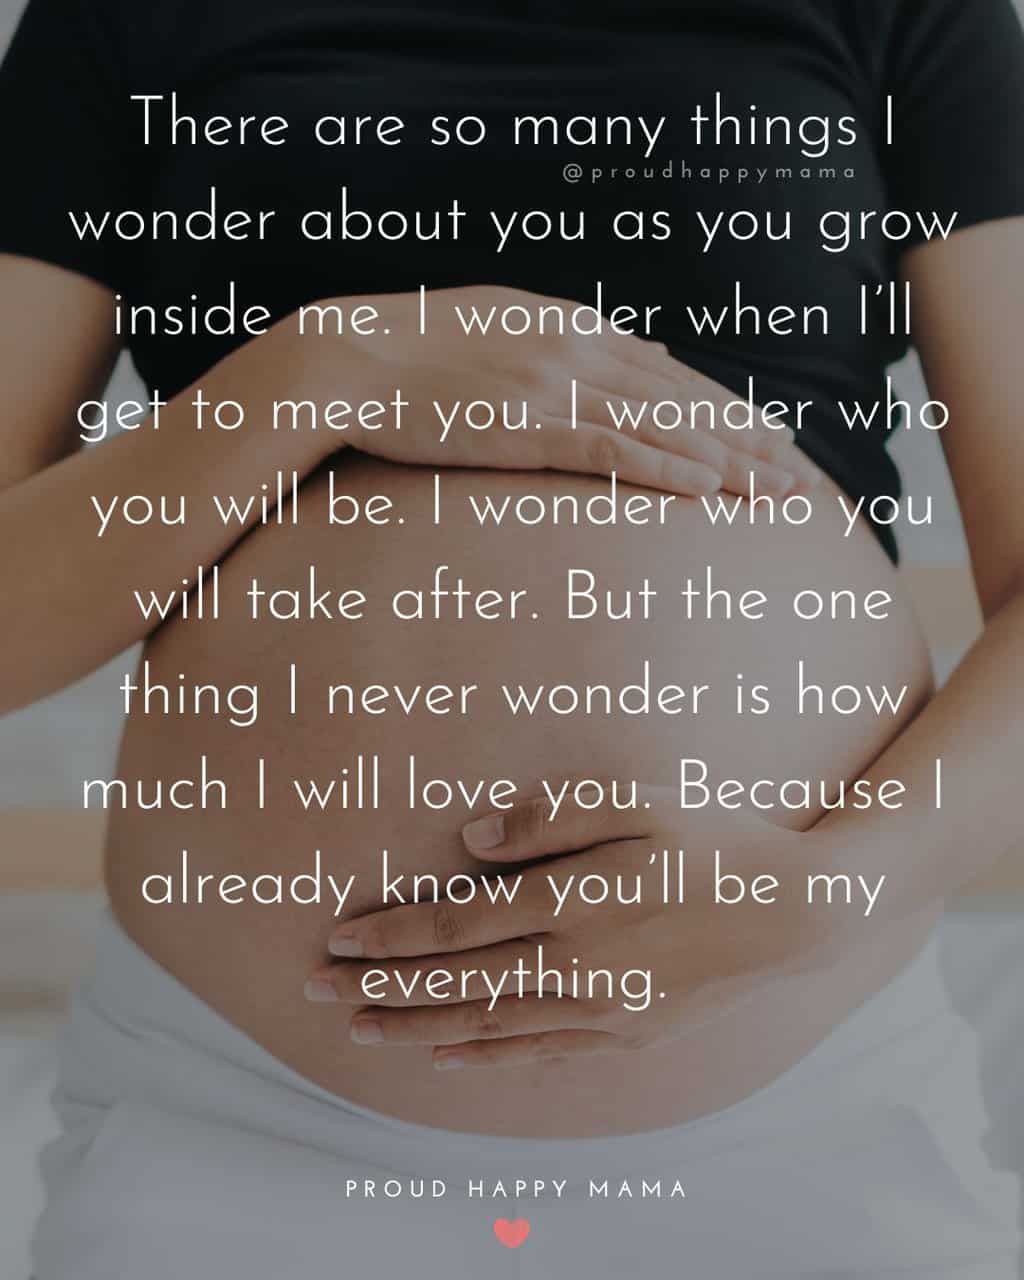 Waiting For Baby Quotes | There are so many things I wonder about you as you grow inside me. I wonder when I’ll get to meet you. I wonder who you will be. I wonder who you will take after. But the one thing I never wonder is how much I will love you. Because I already know you’ll be my everything.